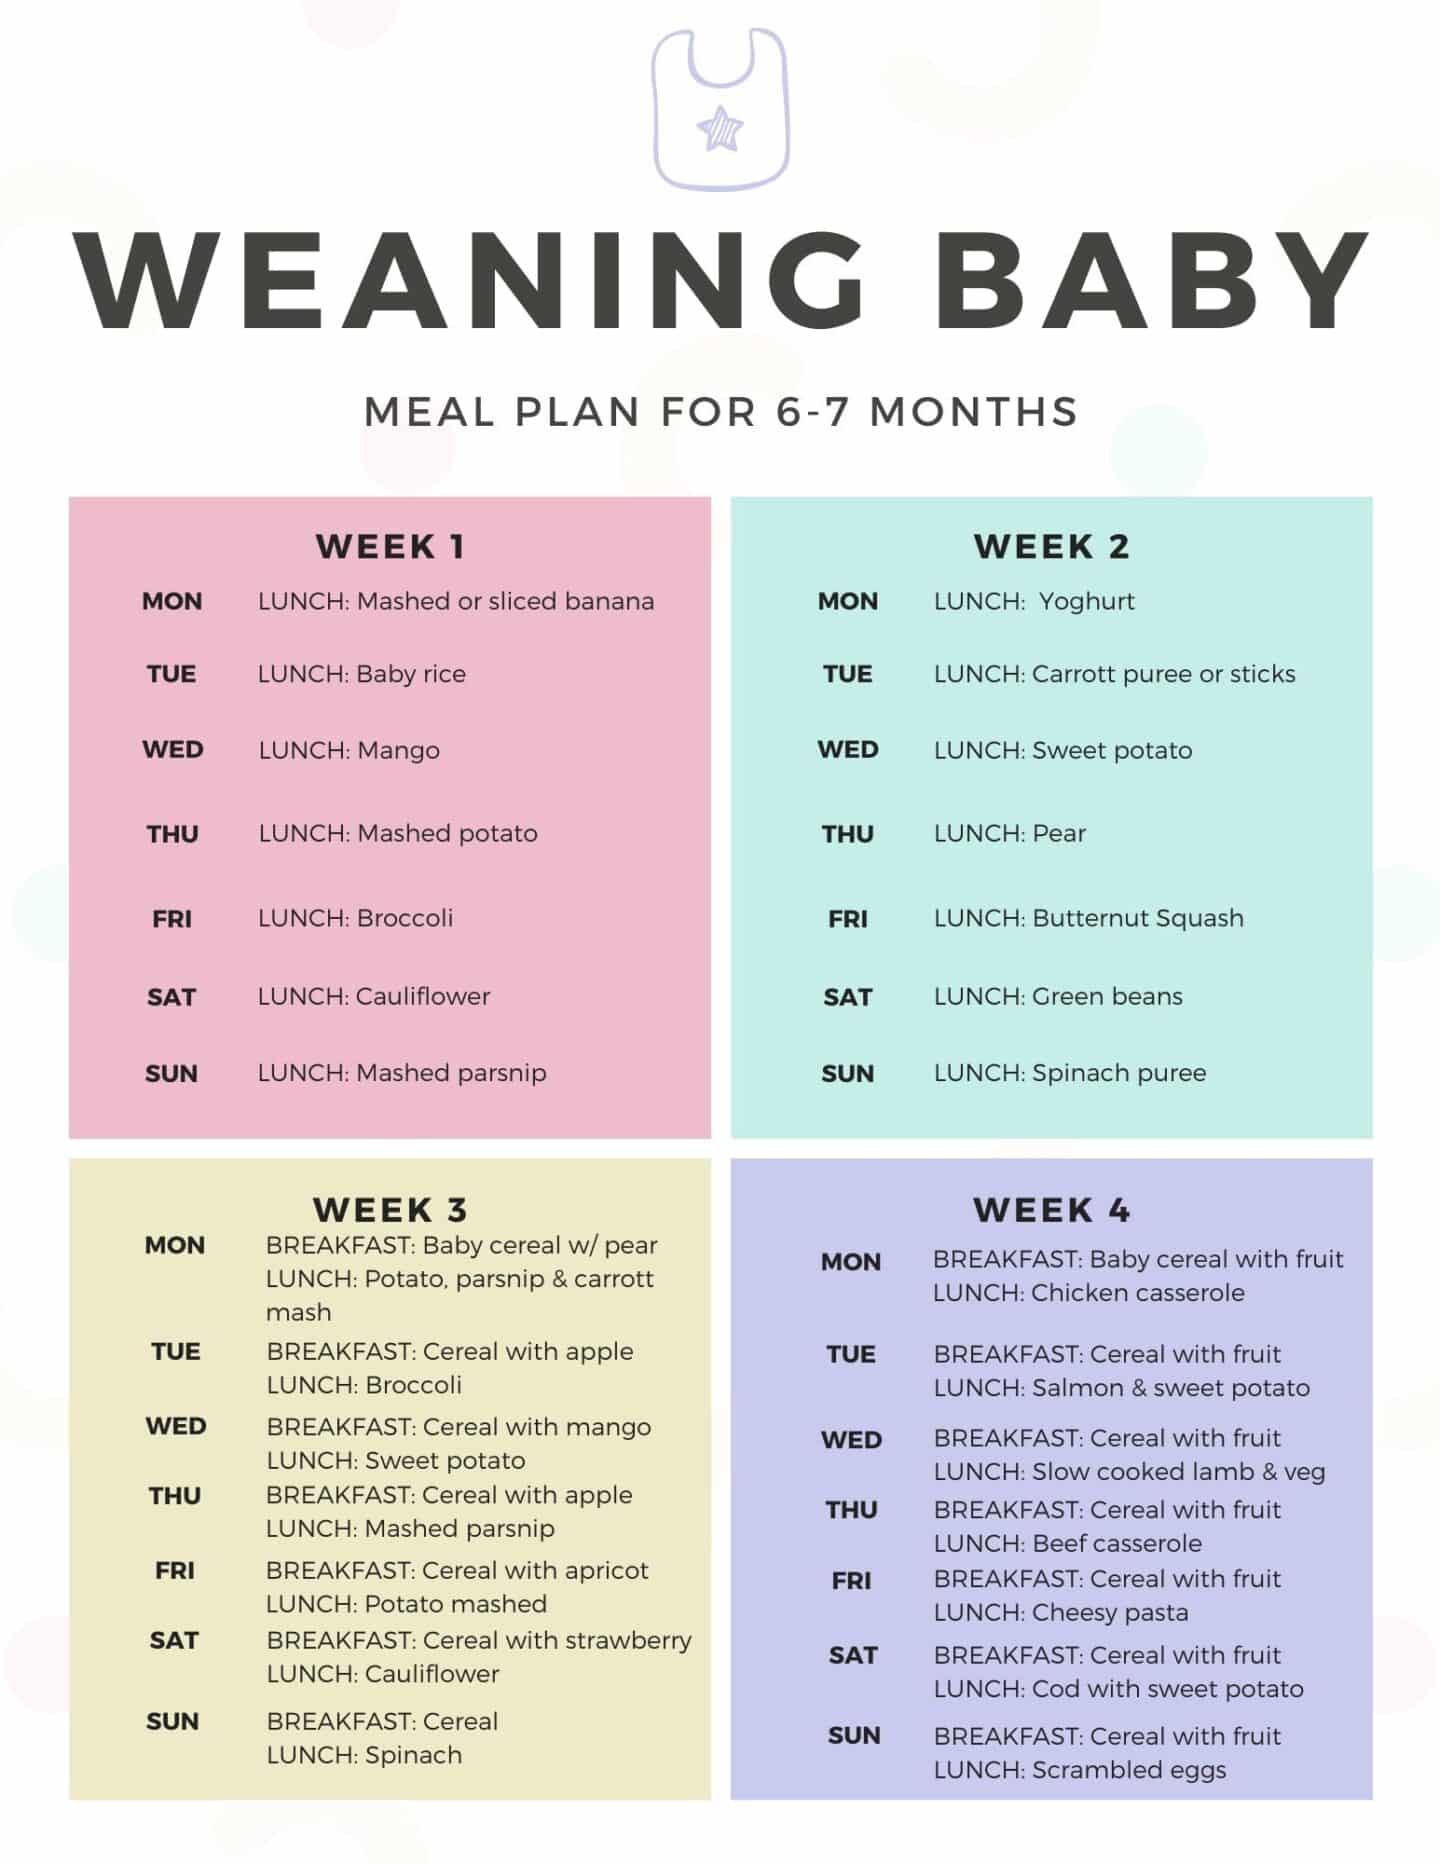 Weaning baby meal plan and routine at six months - The Mummy Bubble